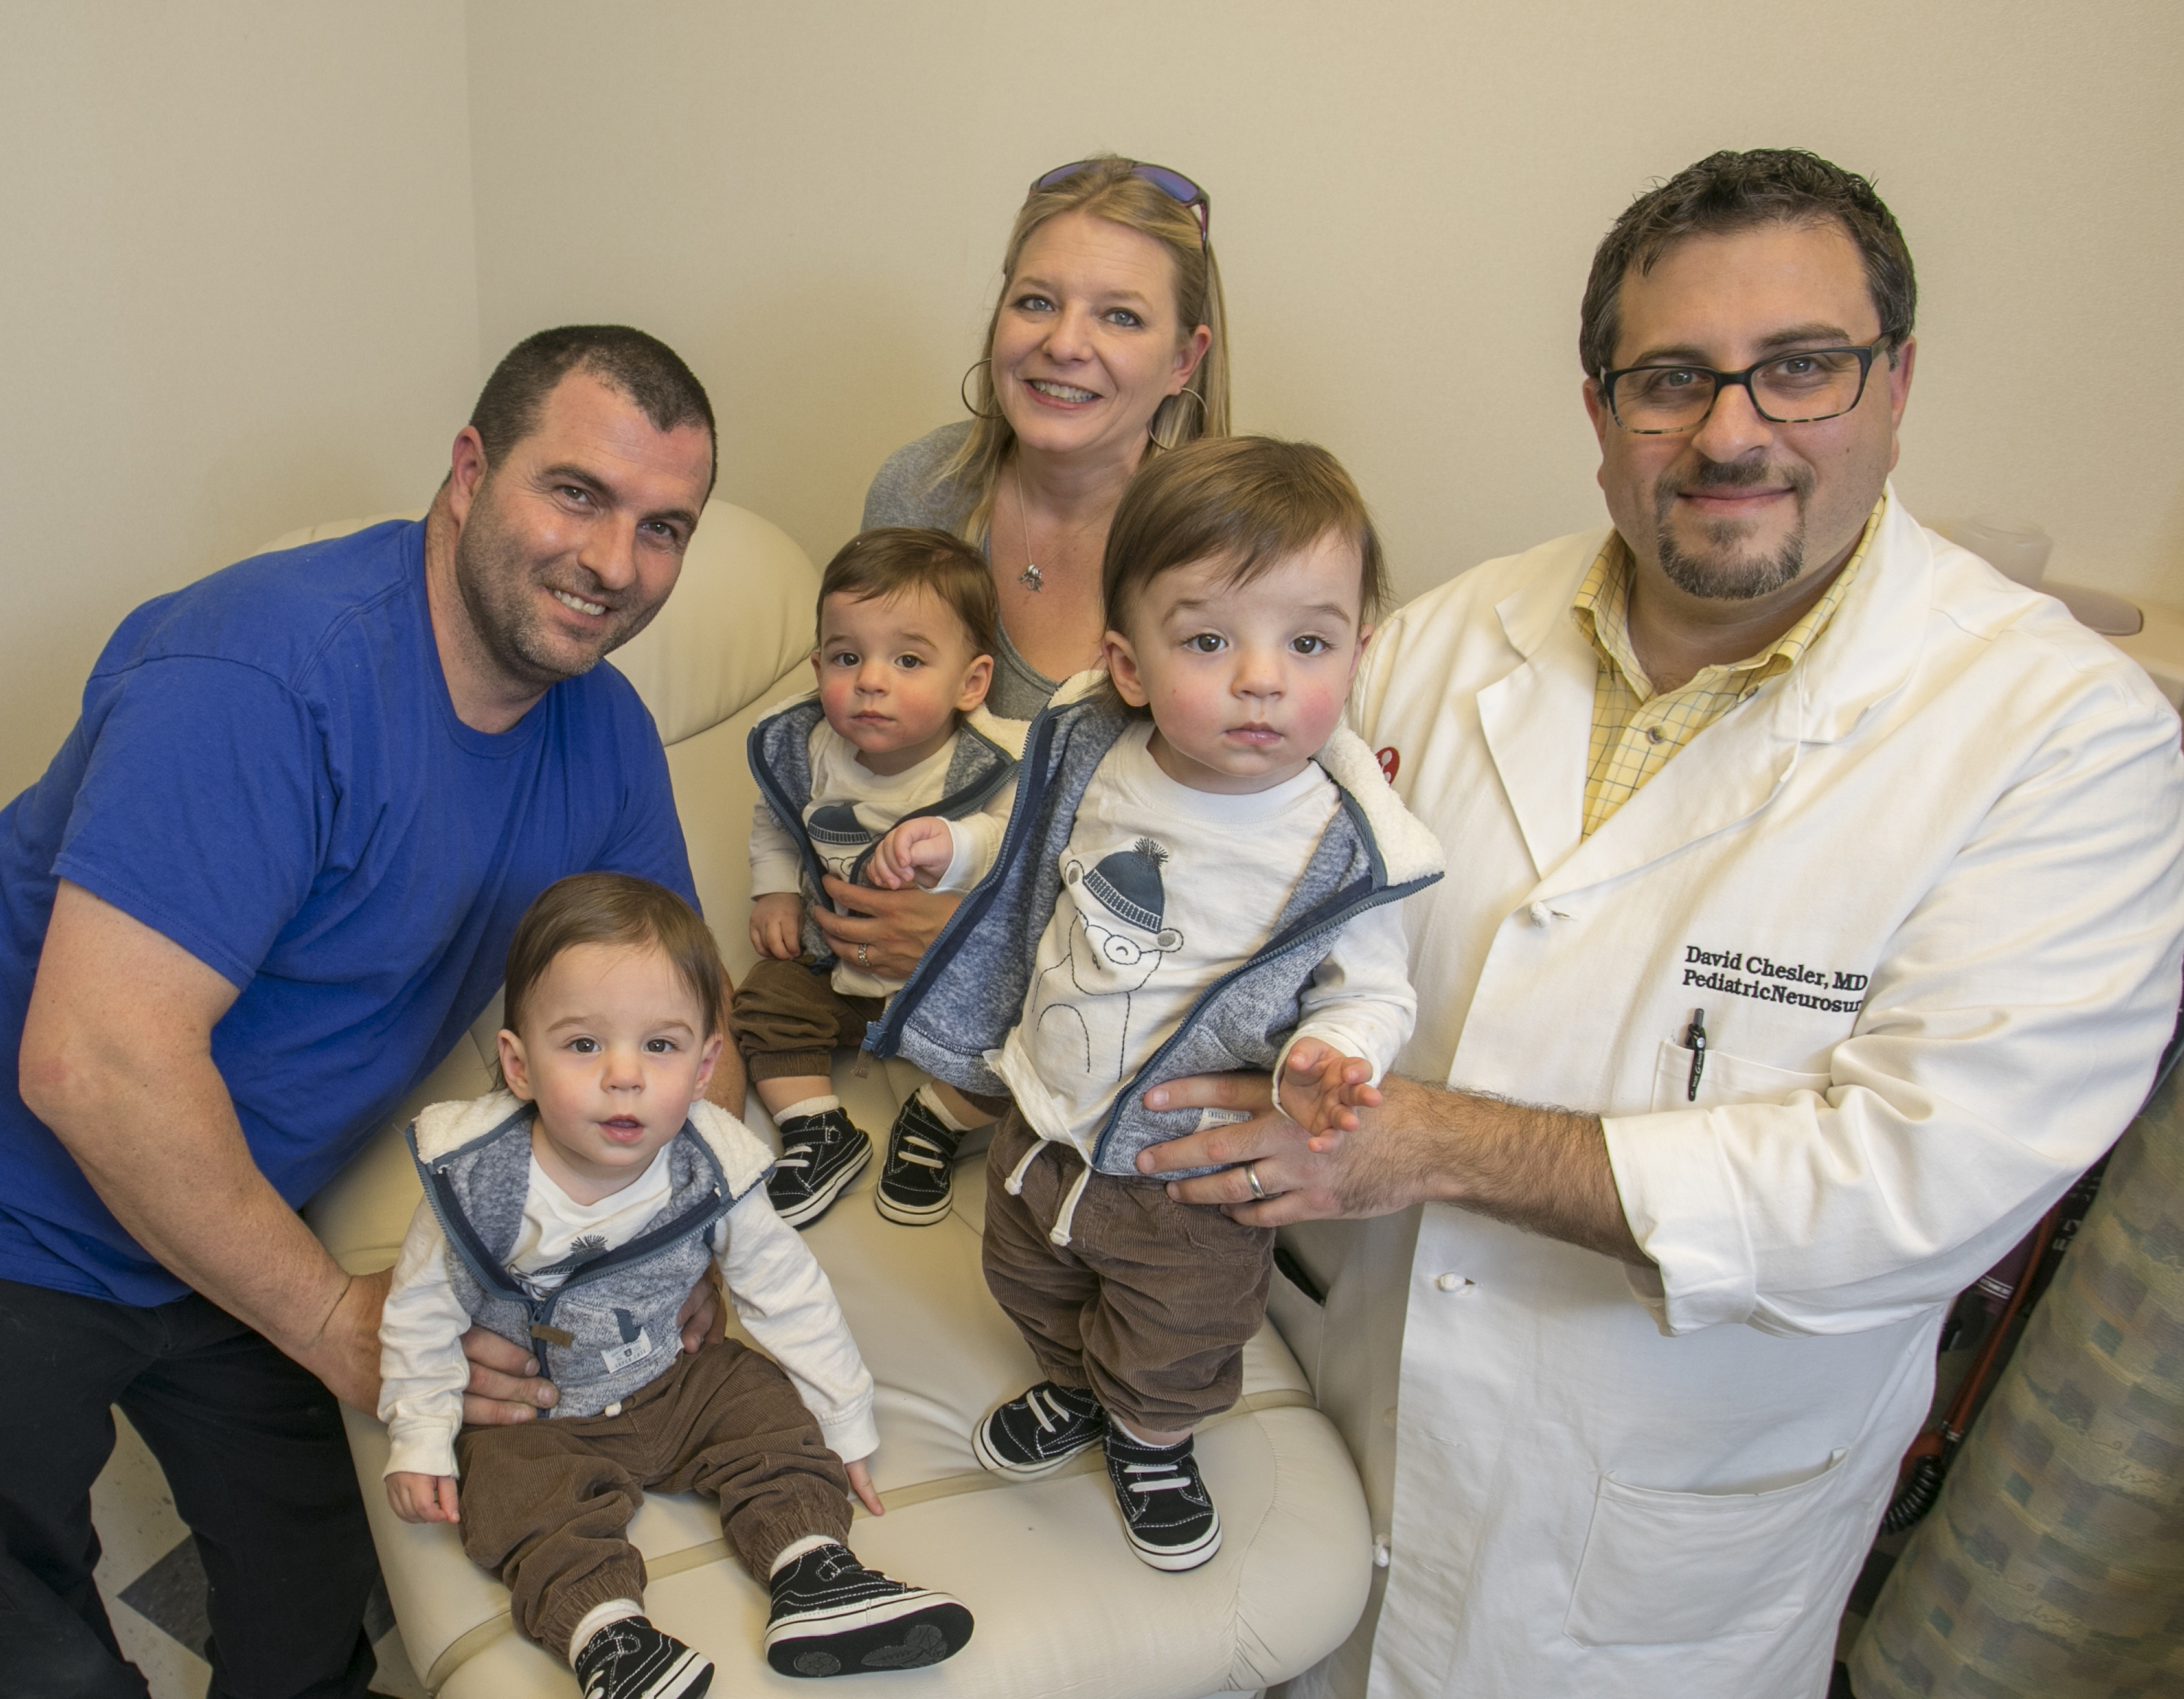 Howard triplets with parents and Dr. David Chesler